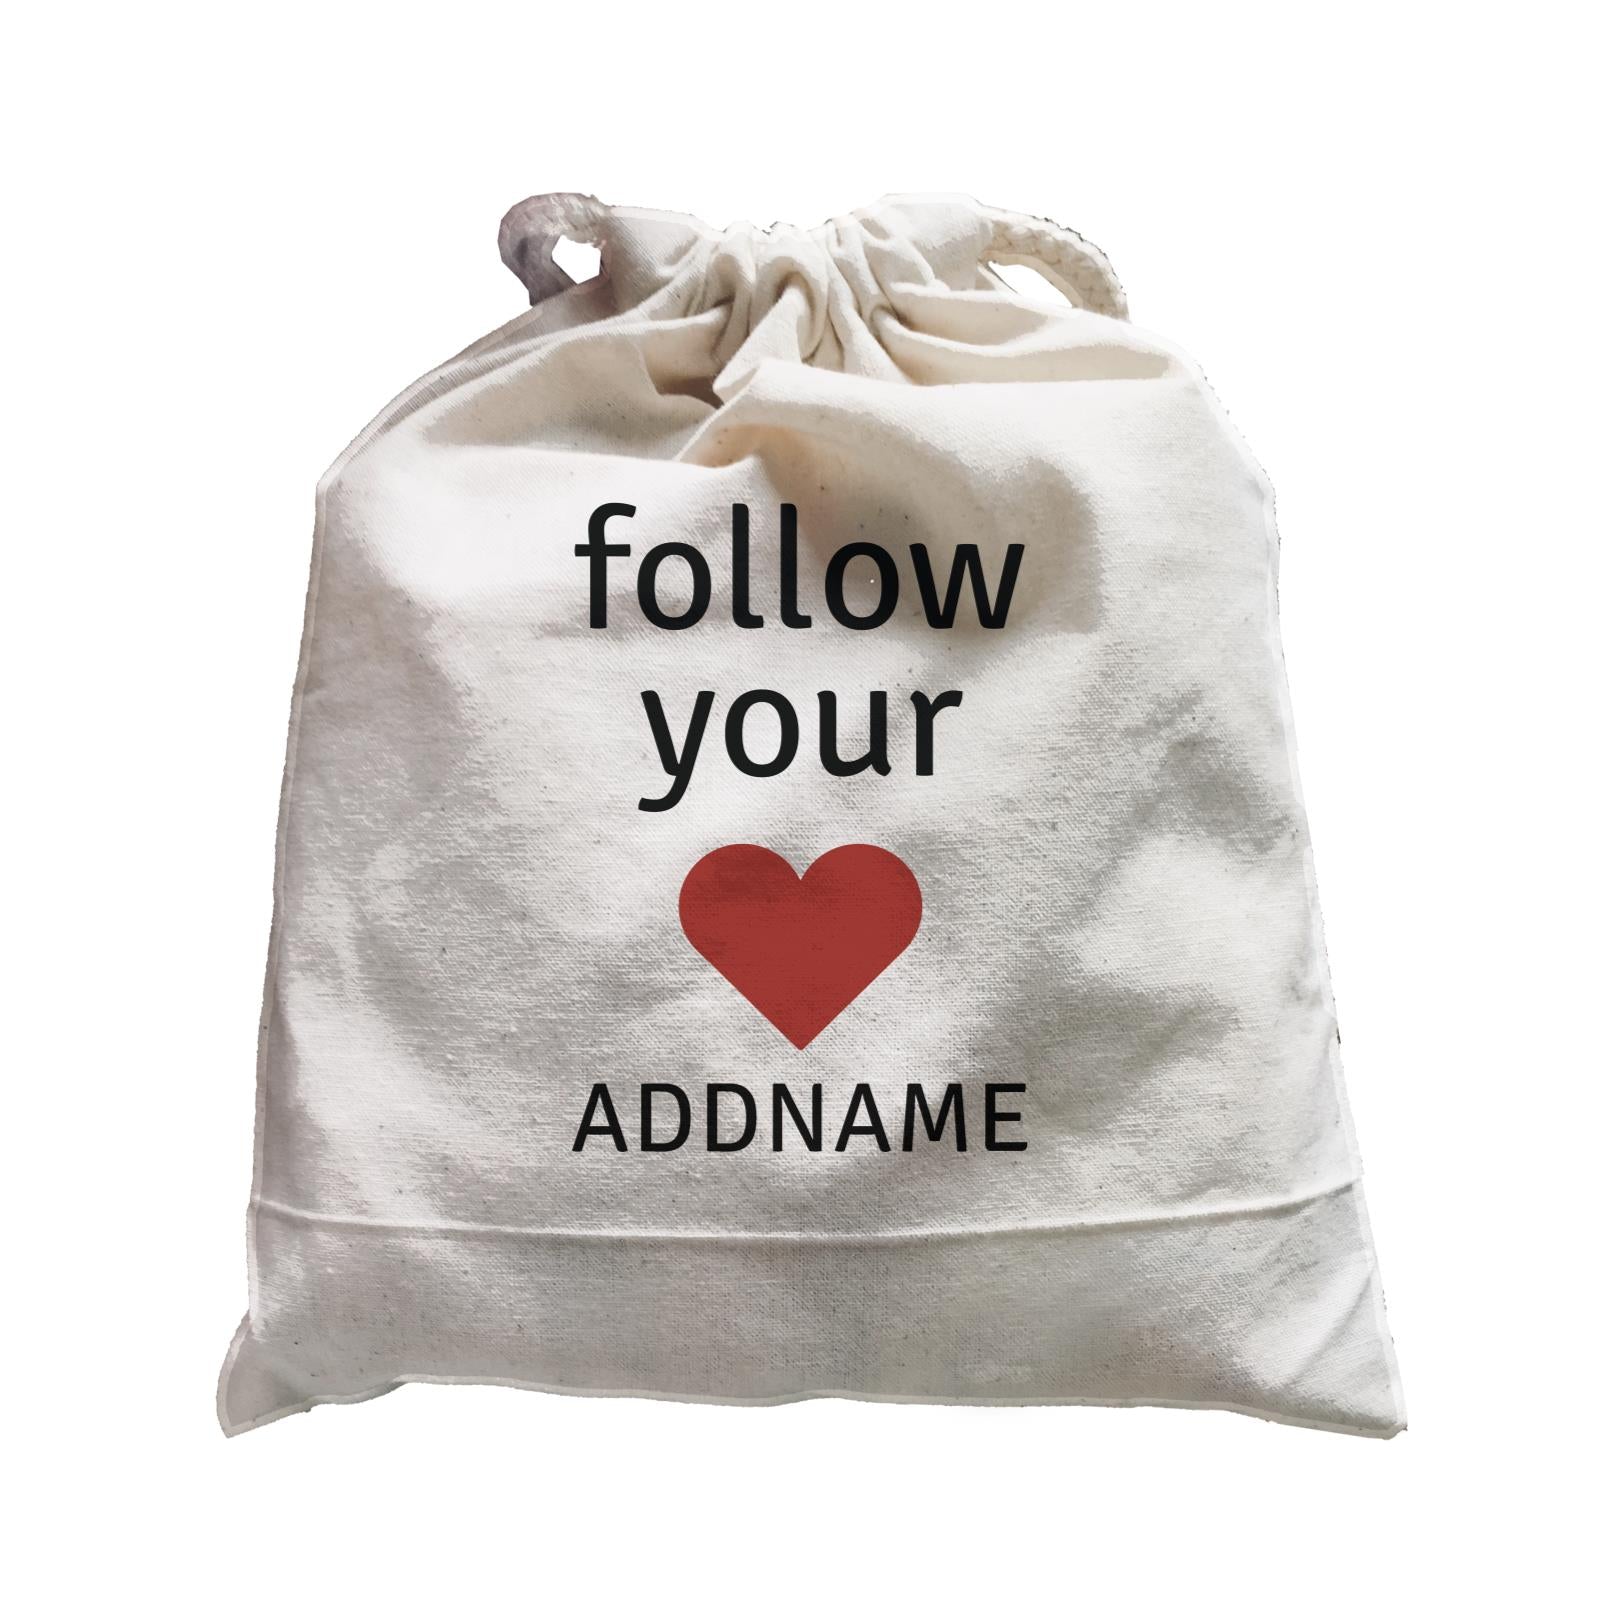 Inspiration Quotes Follow Your Heart Addname Satchel